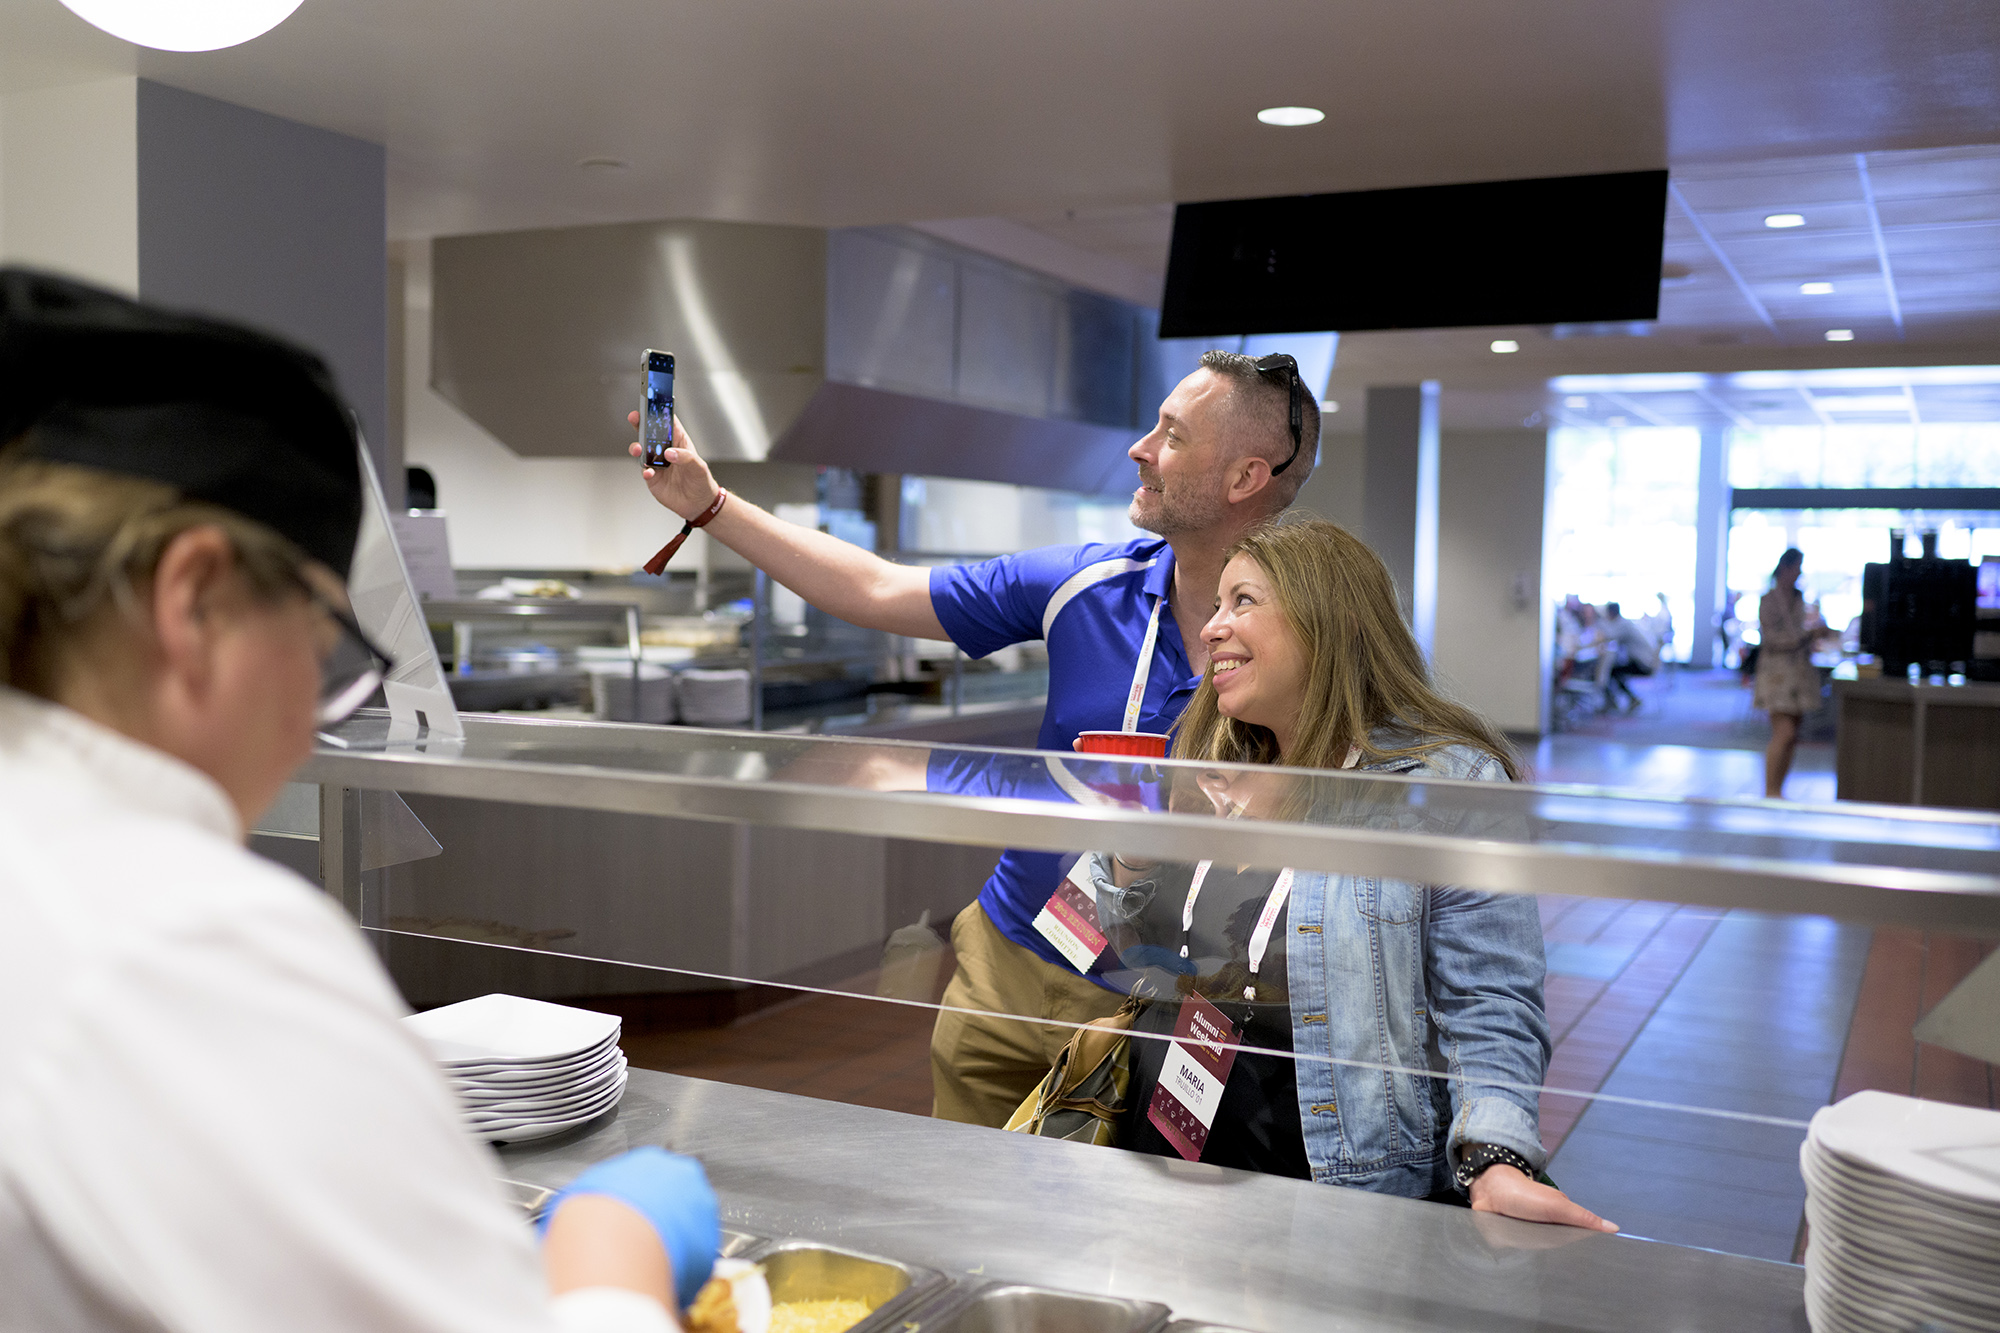 Richard Johnson '01 takes a selfie with a fellow CMCer while waiting for their plates inside Collins Dining Hall.